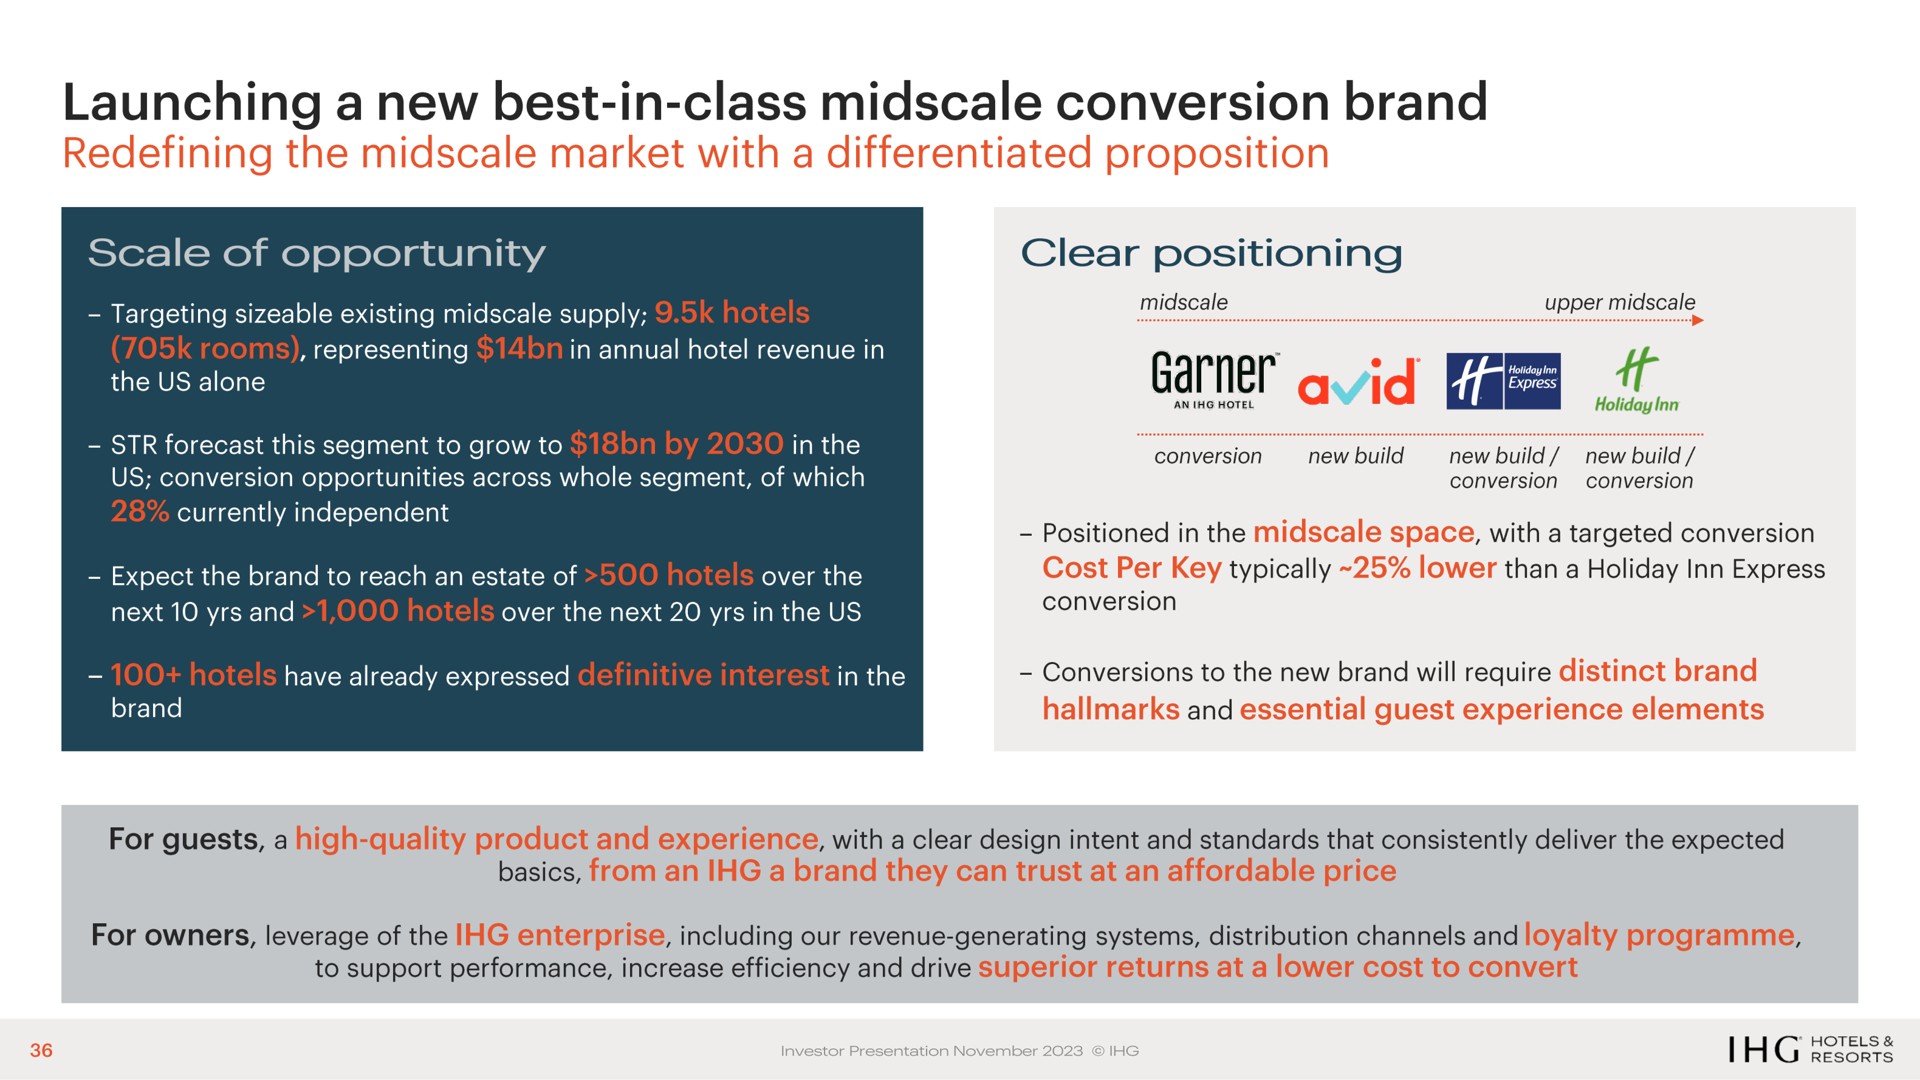 launching a new best in class conversion brand | IHG Hotels